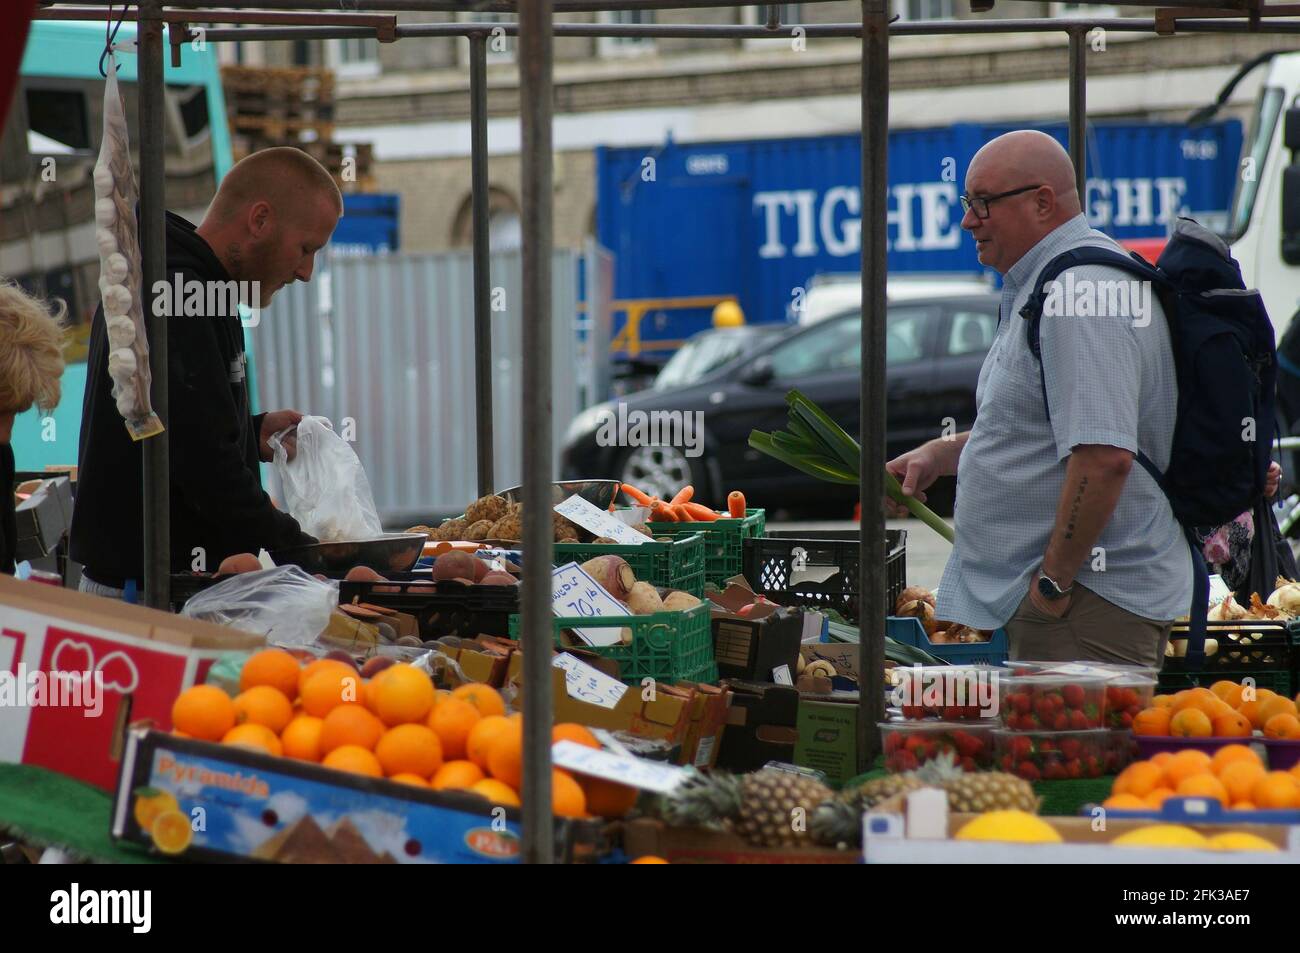 a shopper buying local produce at an outdoor market stall Stock Photo